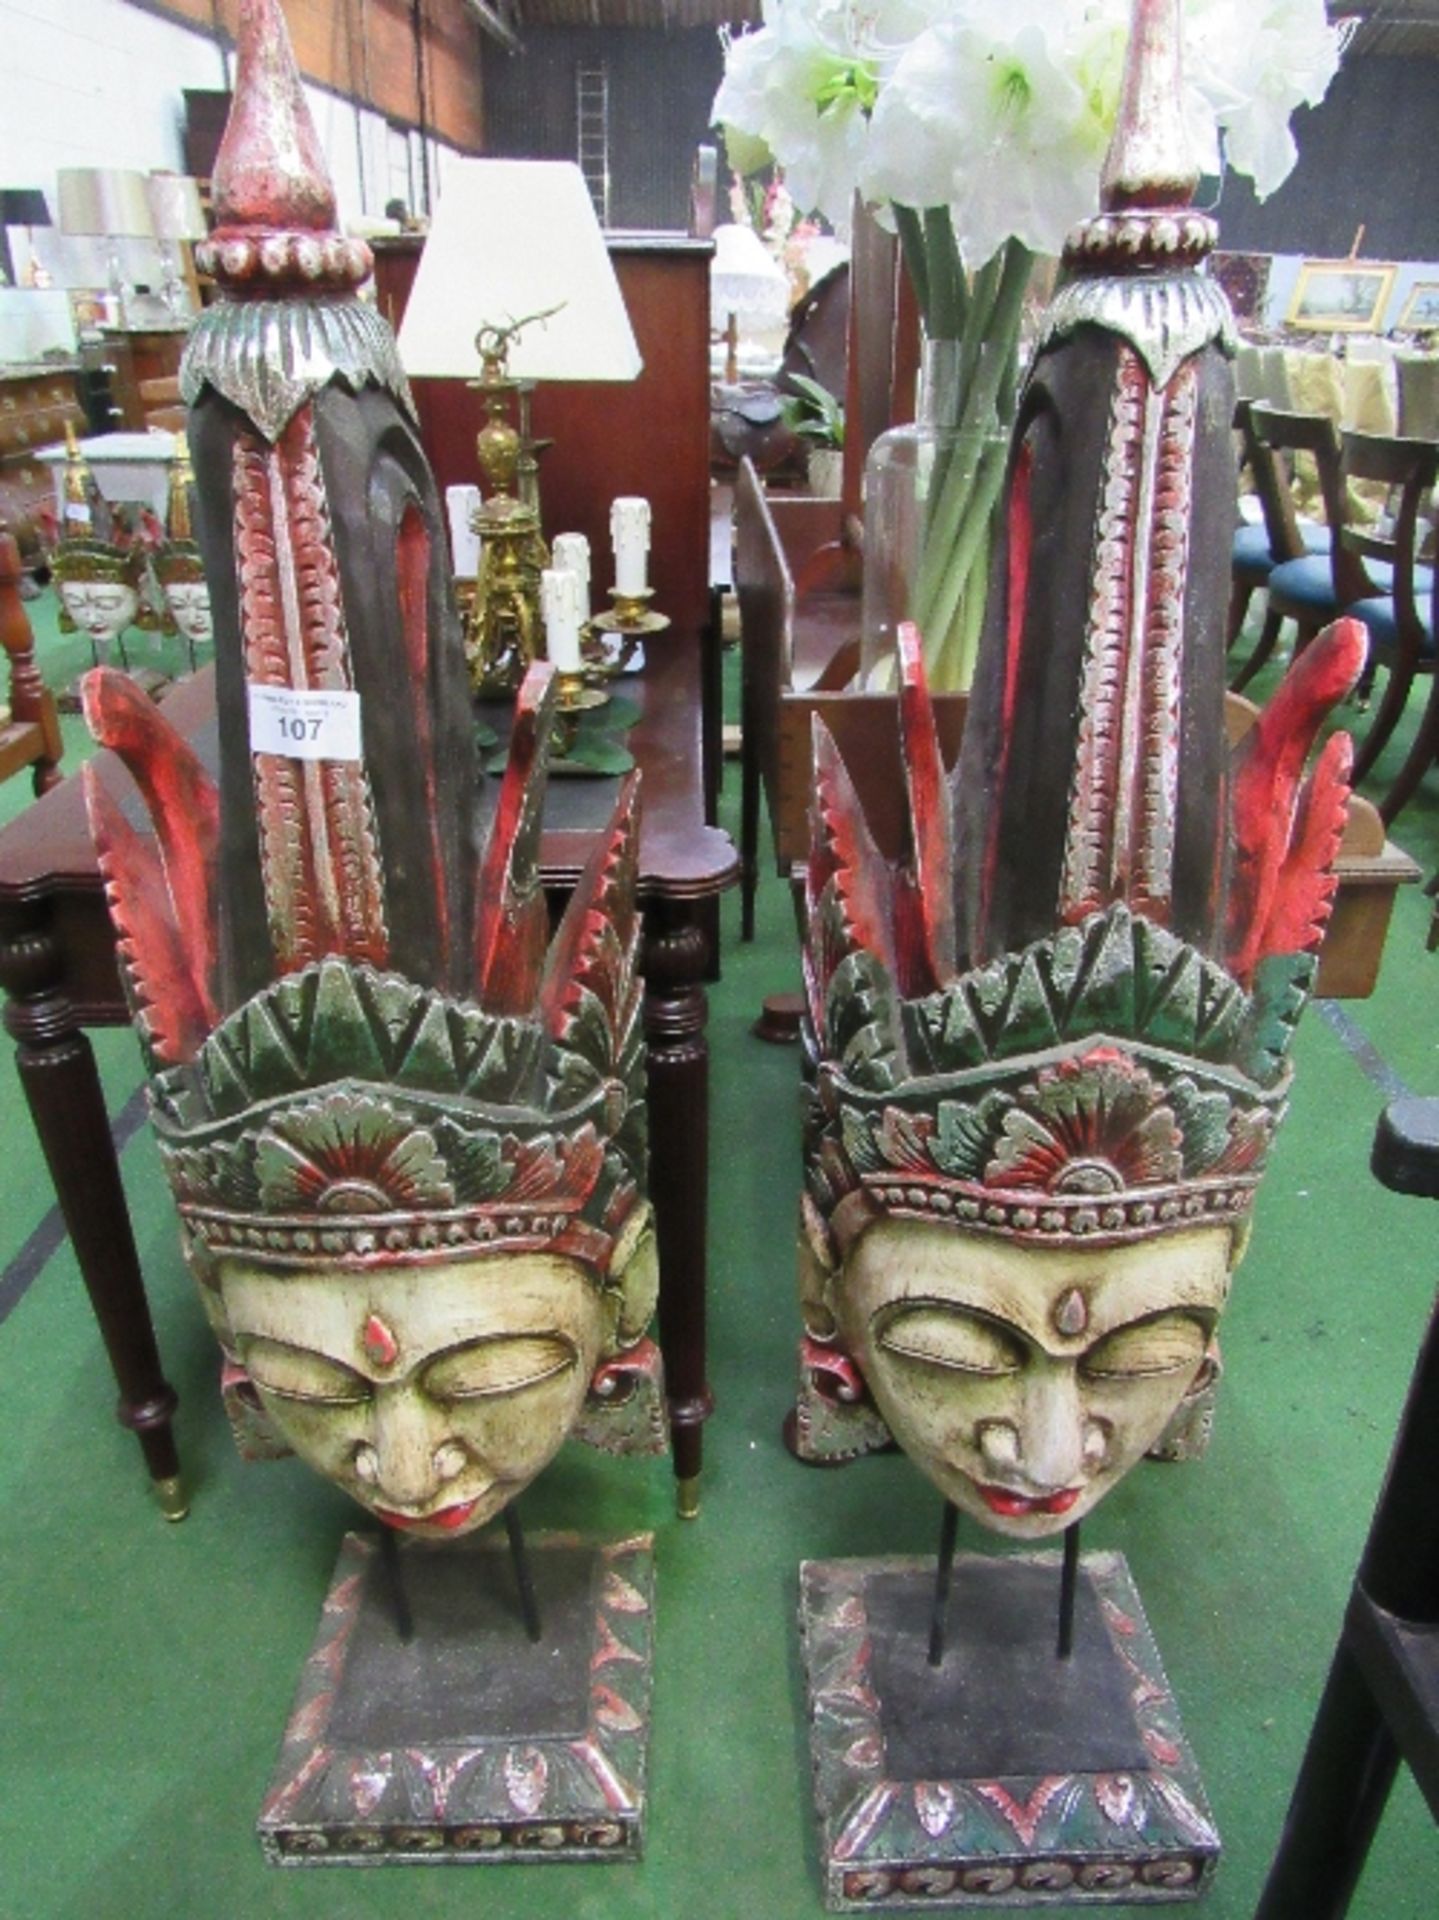 2 large carved wood Balinese female masks on stands